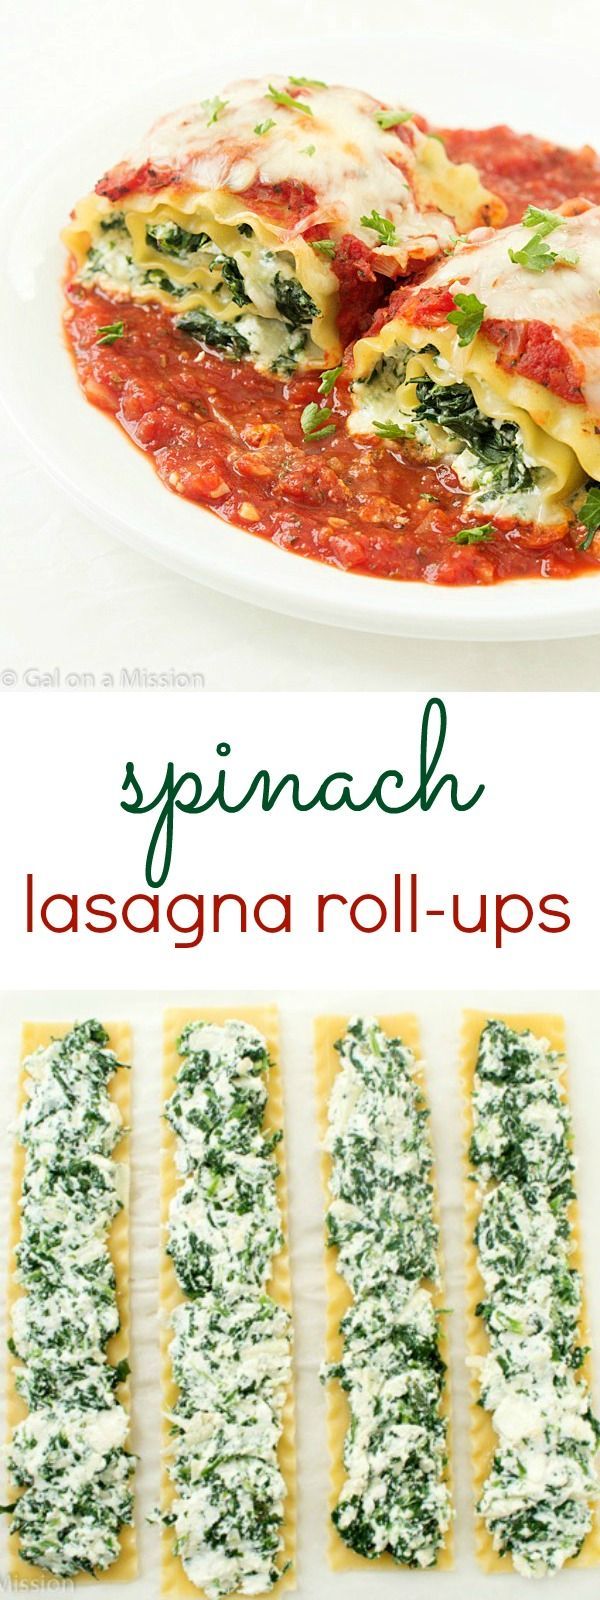 Spinach Lasagna Roll-Up Recipe: An incredible easy weeknight or weekend dinner the entire family will enjoy! Step-by-step photos